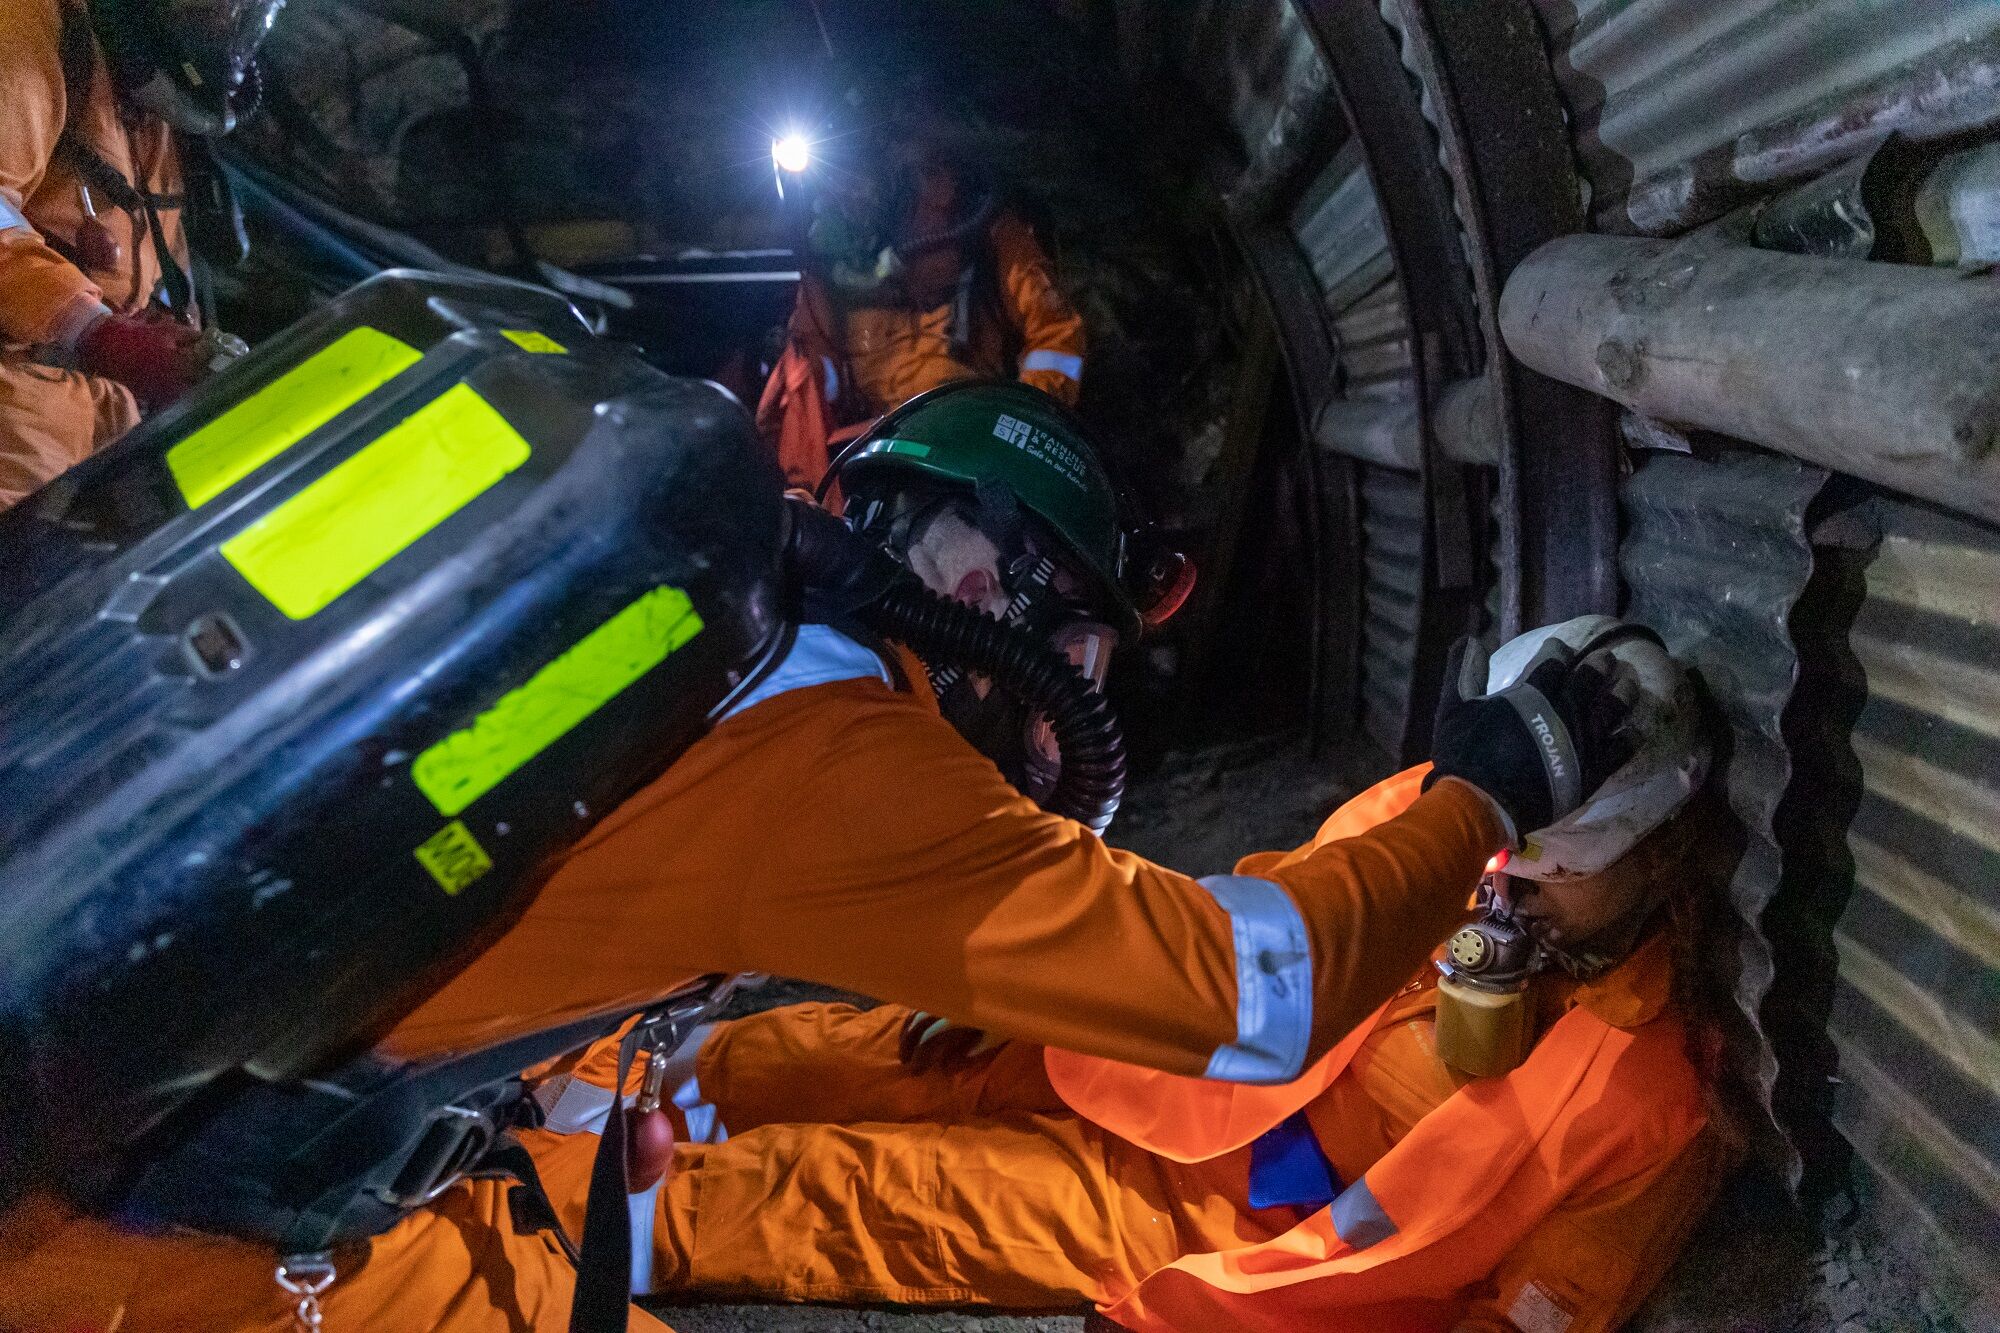 Draeger Safety UK partners with MRS Training and Rescue to develop future safety technologies